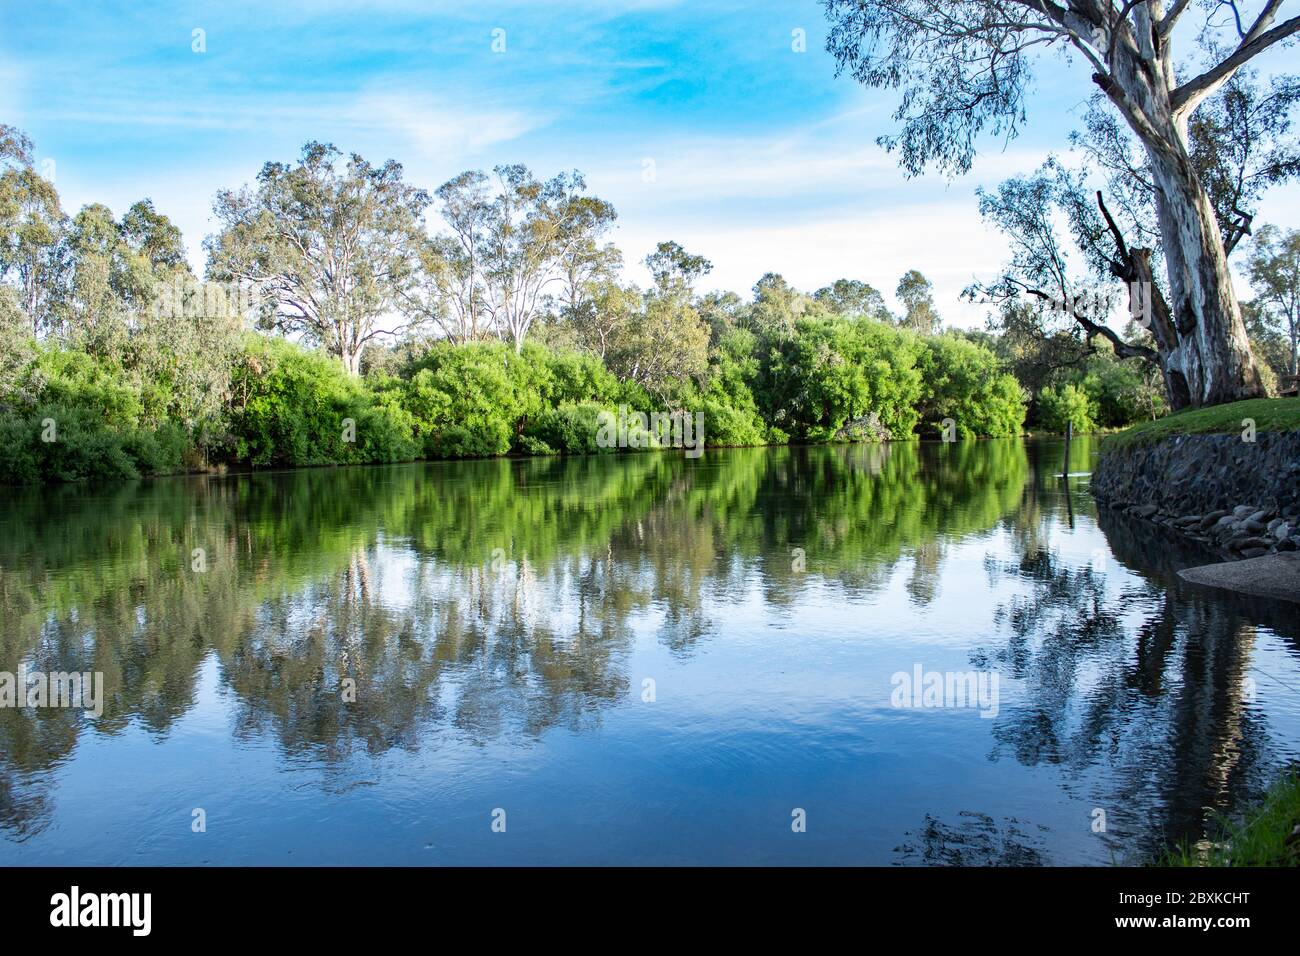 Tranquil reflections of trees in river water surface with Eucalyptus gum trees against blue sky Stock Photo